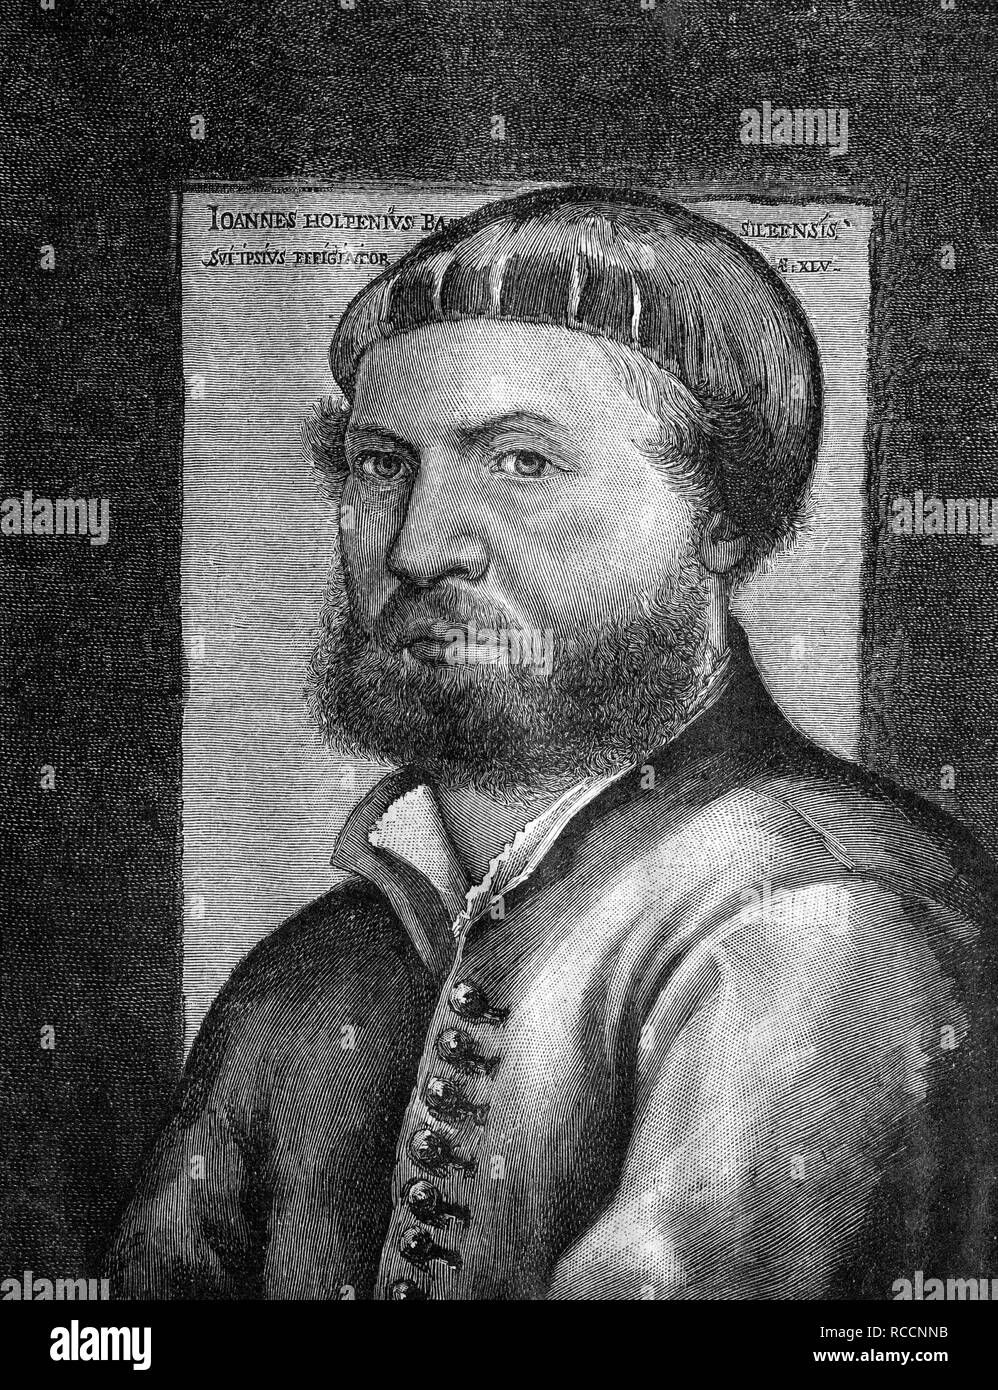 Hans Holbein the Younger, 1497 - 1543, a German painter, historic wood engraving, about 1897 Stock Photo